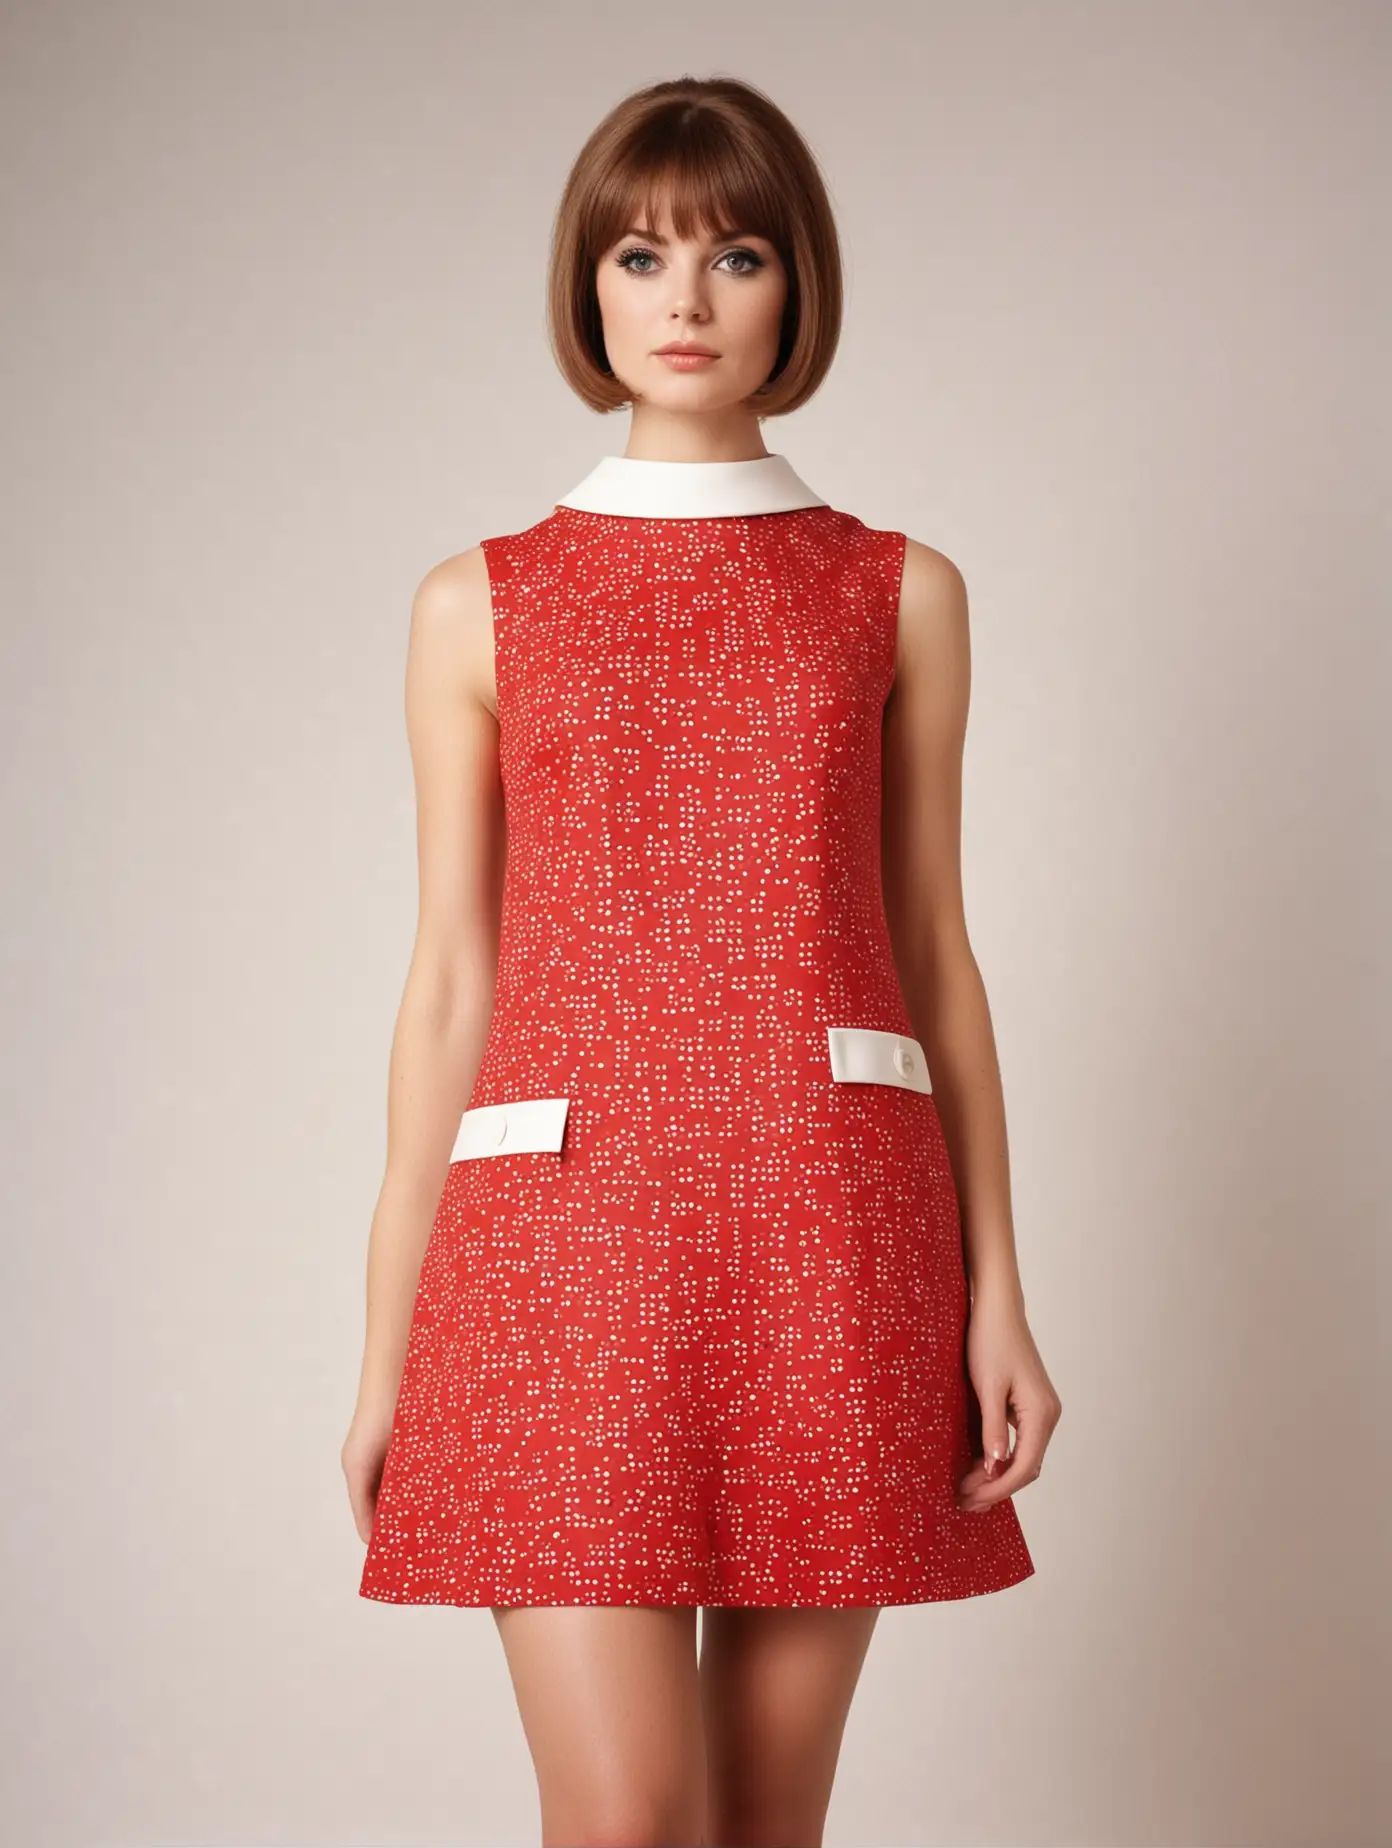 A British mod 1960s beauty icon, top model, wearing a A-line ultra mini dress,  red, portrait, white background 